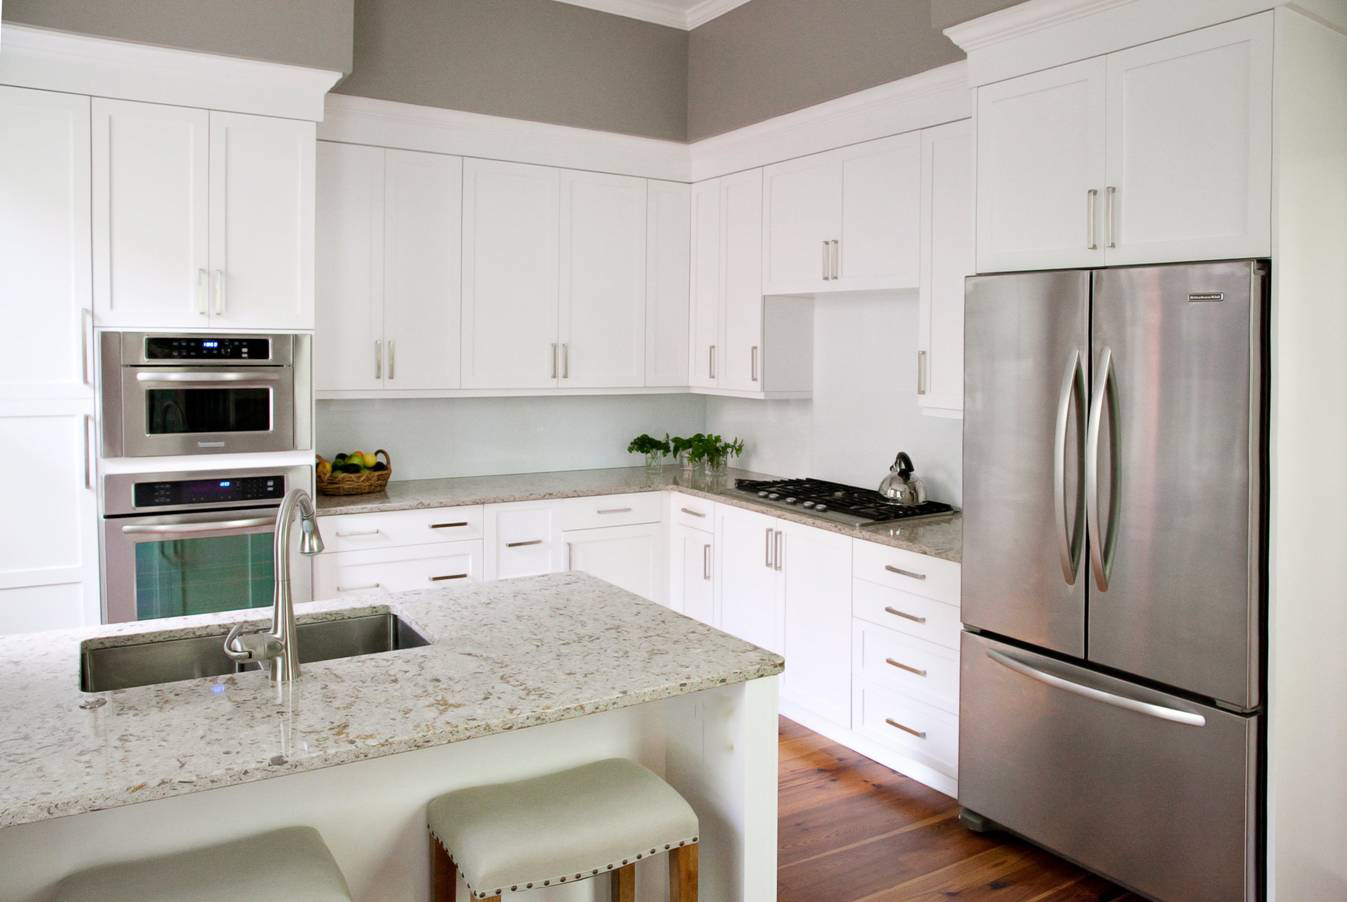 Most Popular Kitchen Cabinet Colors in 2019 | Plain ...